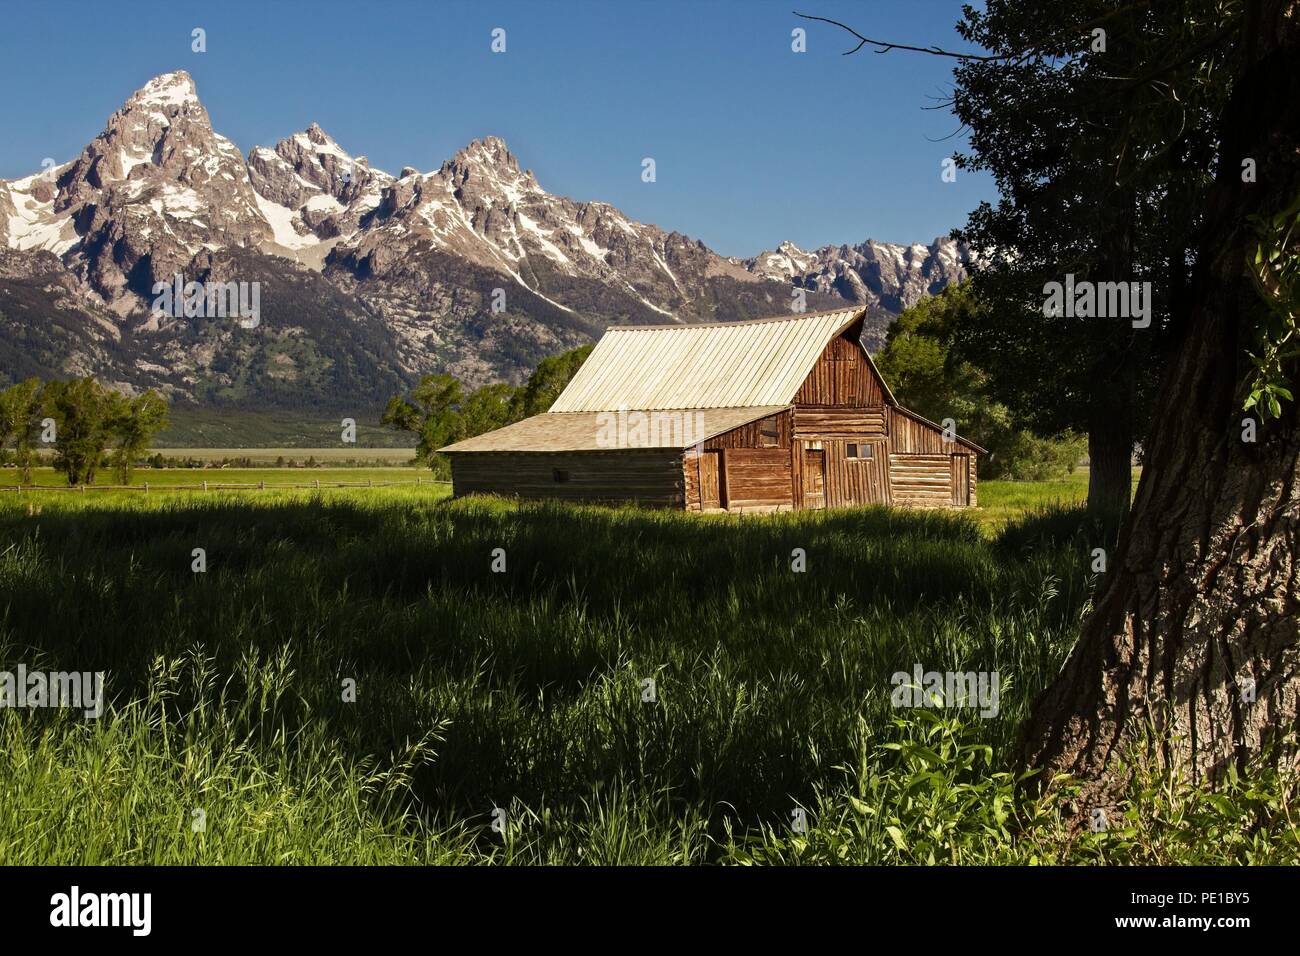 Historic Barn and the Teton Range: View of the historic T. A. Moulton barn just clearing the early morning shadows at the base of the Teton Range. Stock Photo